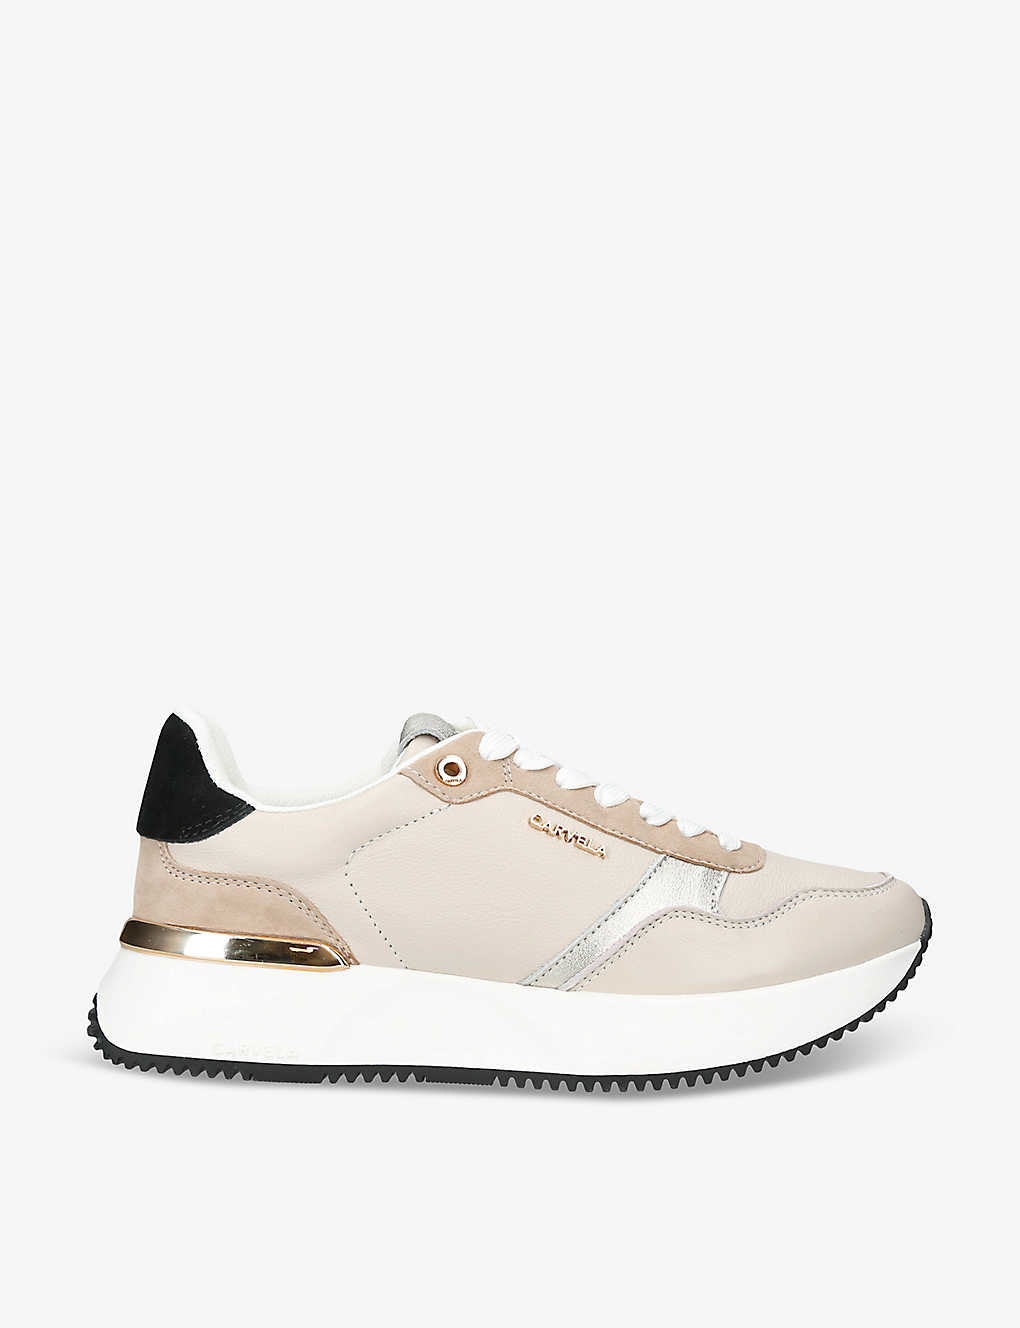 Carvela Womens Cream Comb Flare Leather Low-top Trainers